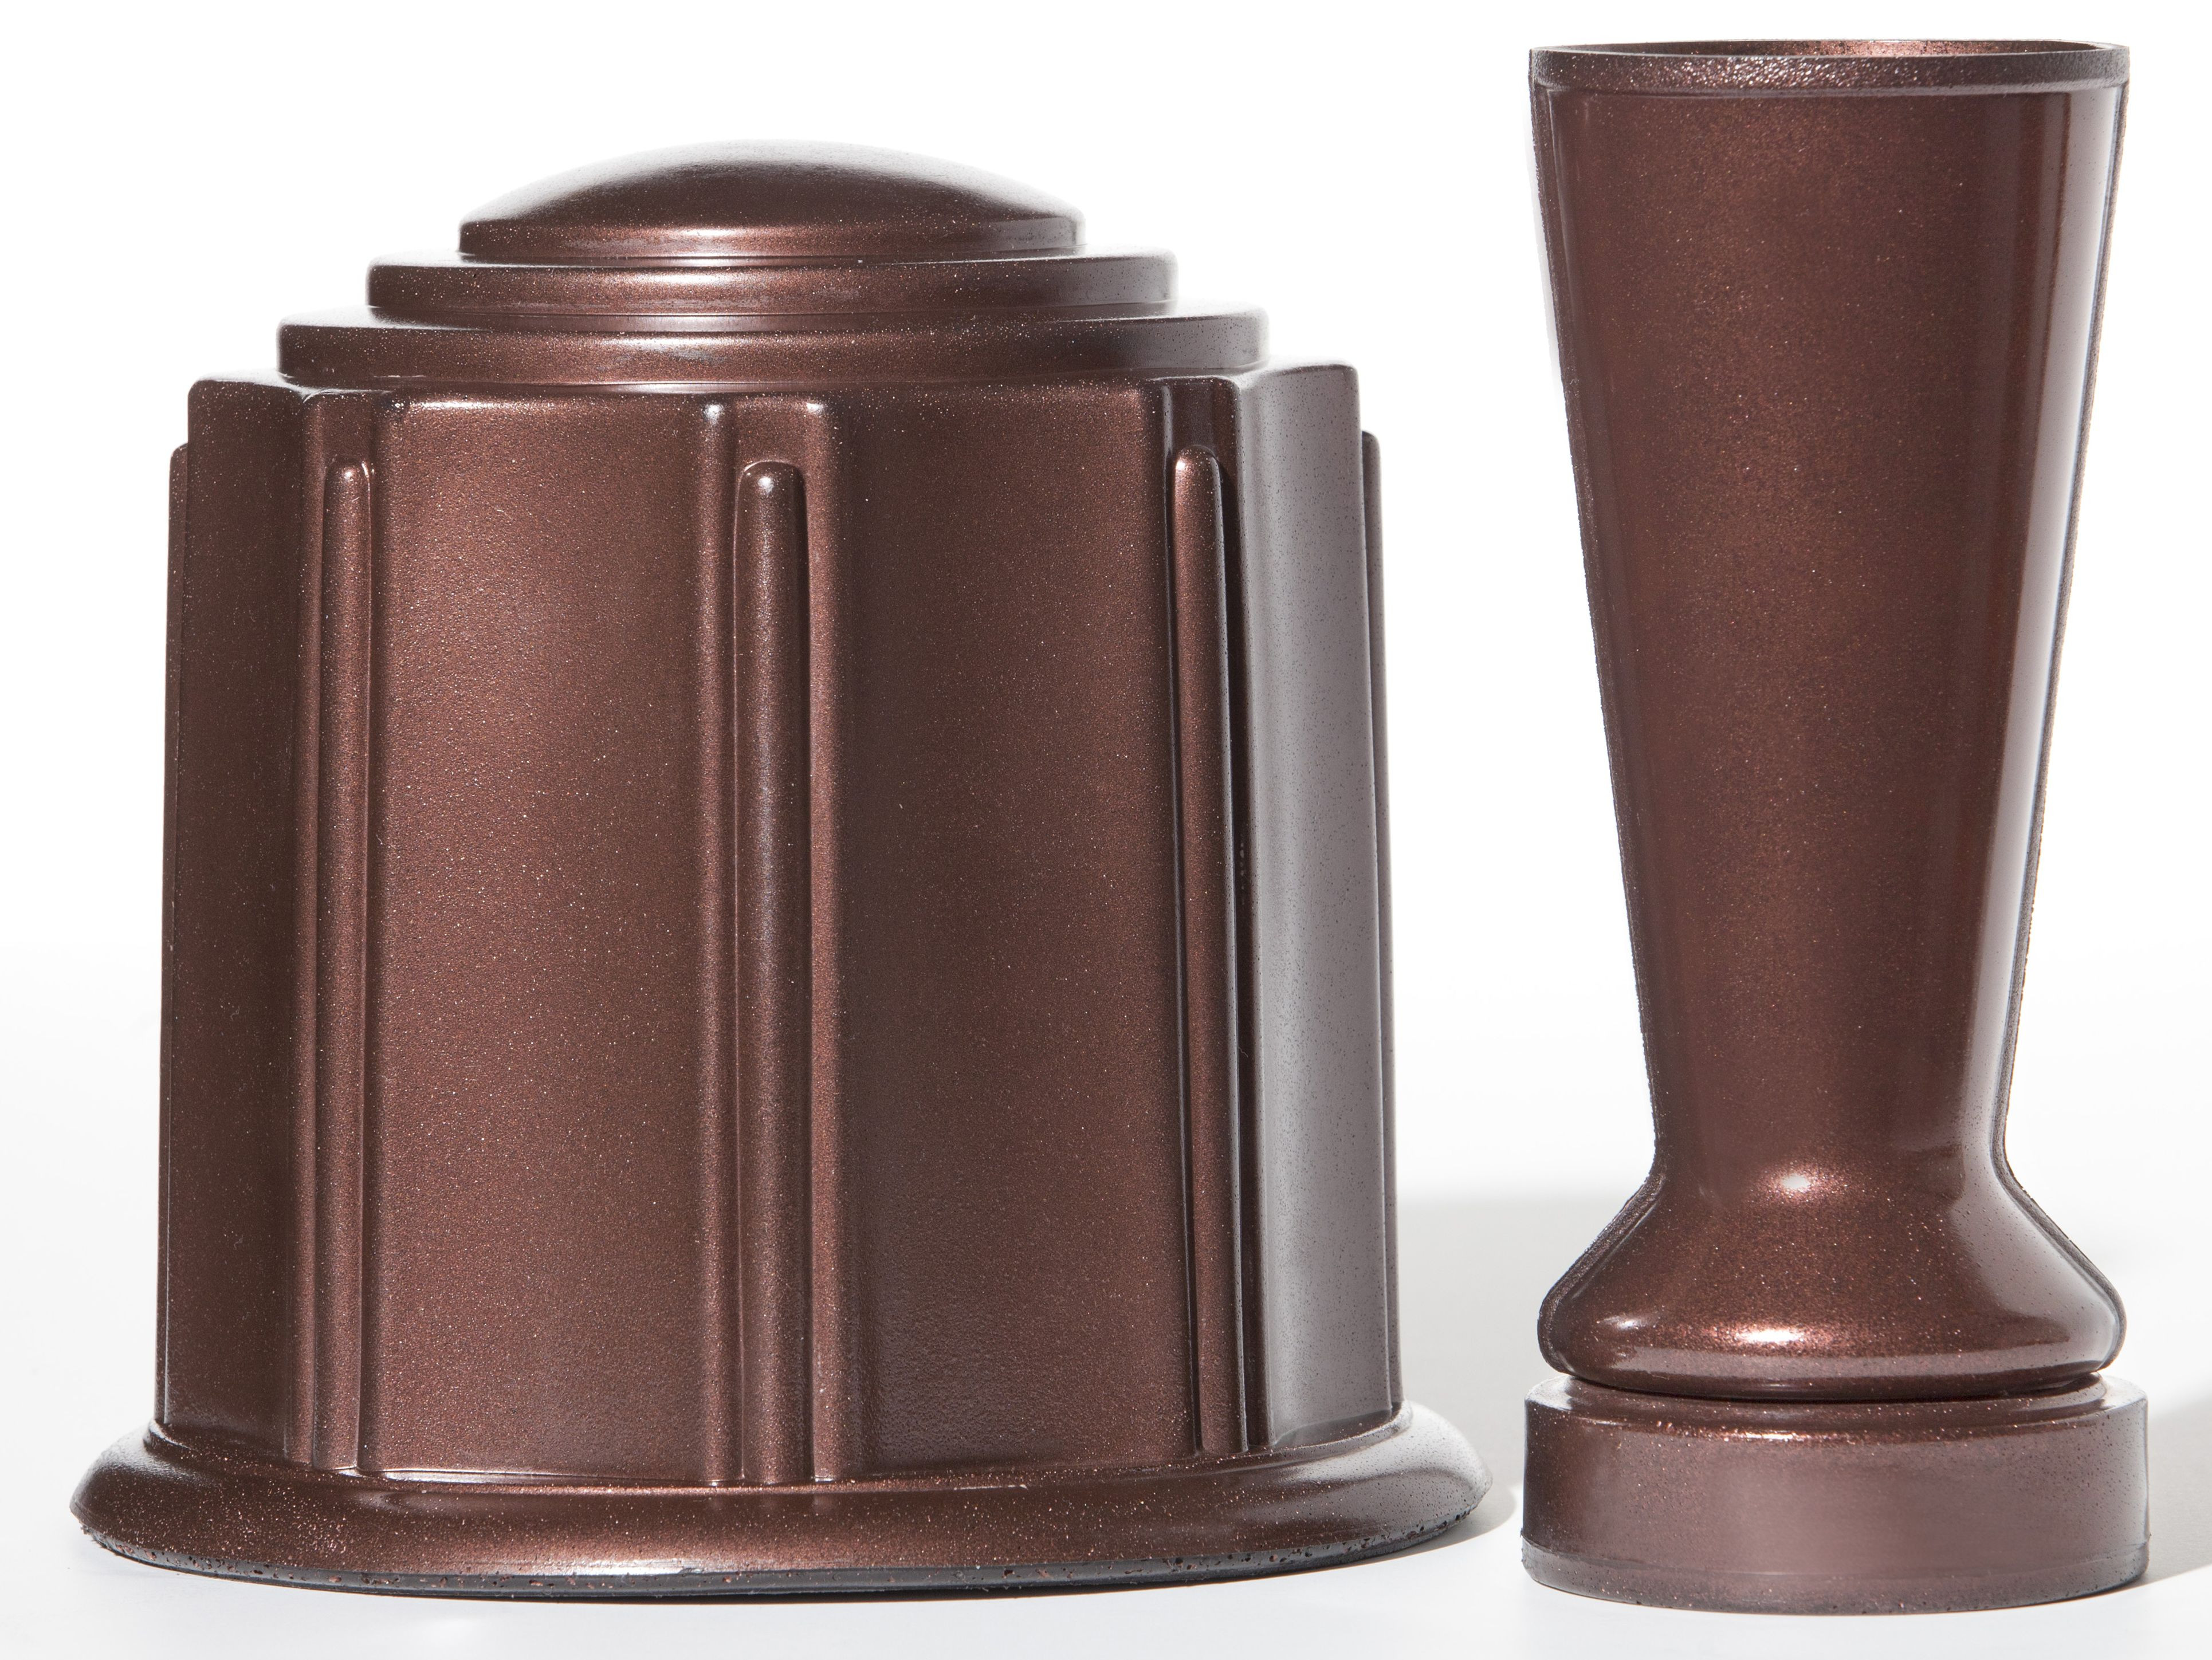 replacement bronze cemetery vases of foreversafe products theft deterrent water tight urn and cemetery regarding foreversafe products theft deterrent water tight urn and cemetery flower vase both in beautiful mahogany